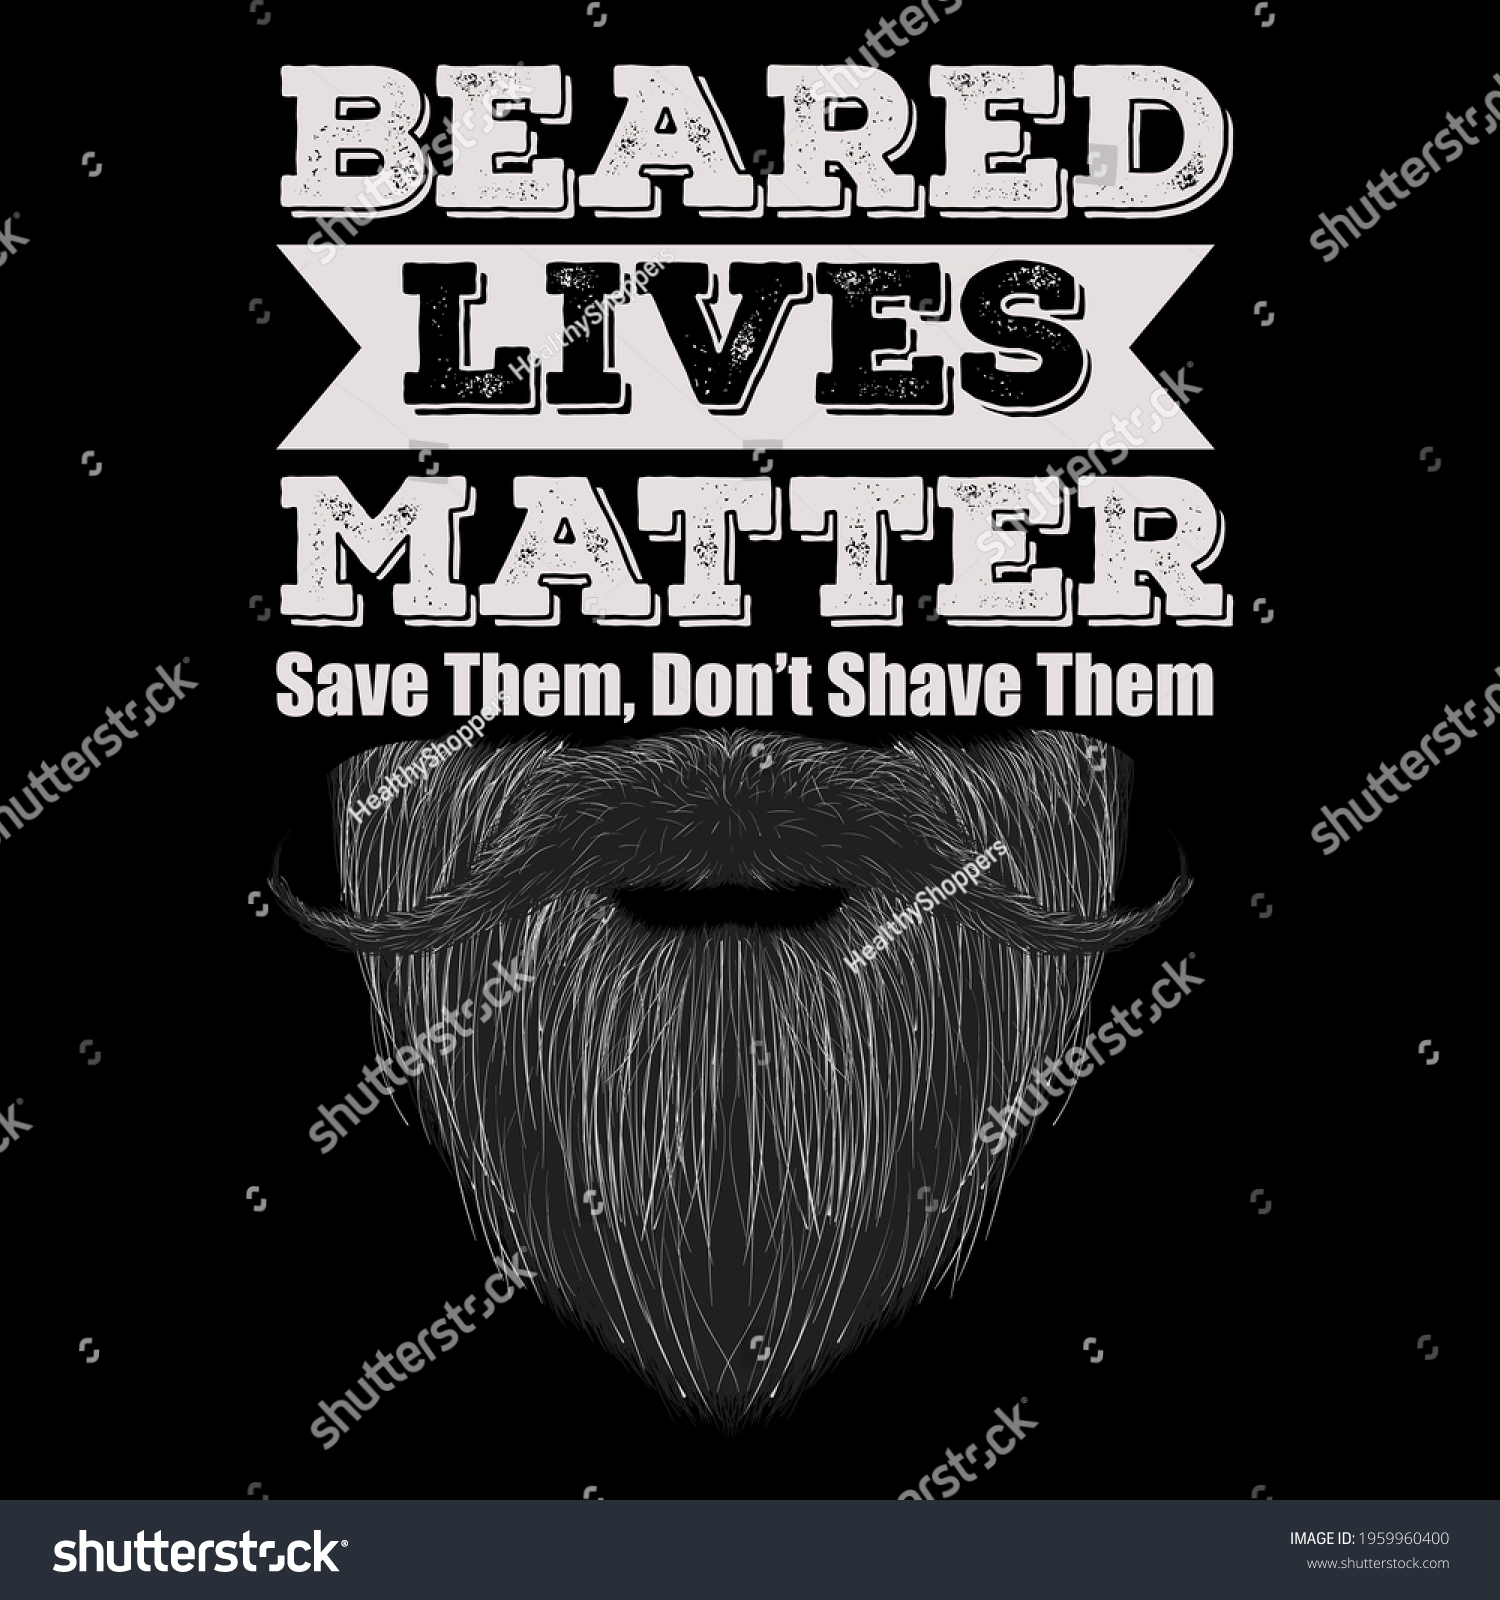 SVG of Father's day gift t-shirt. Beard Lives Matter Save Them,Don't Shave Them .Beard T-shirt  Funny quotes. T-shirt Design template for Father's day. svg